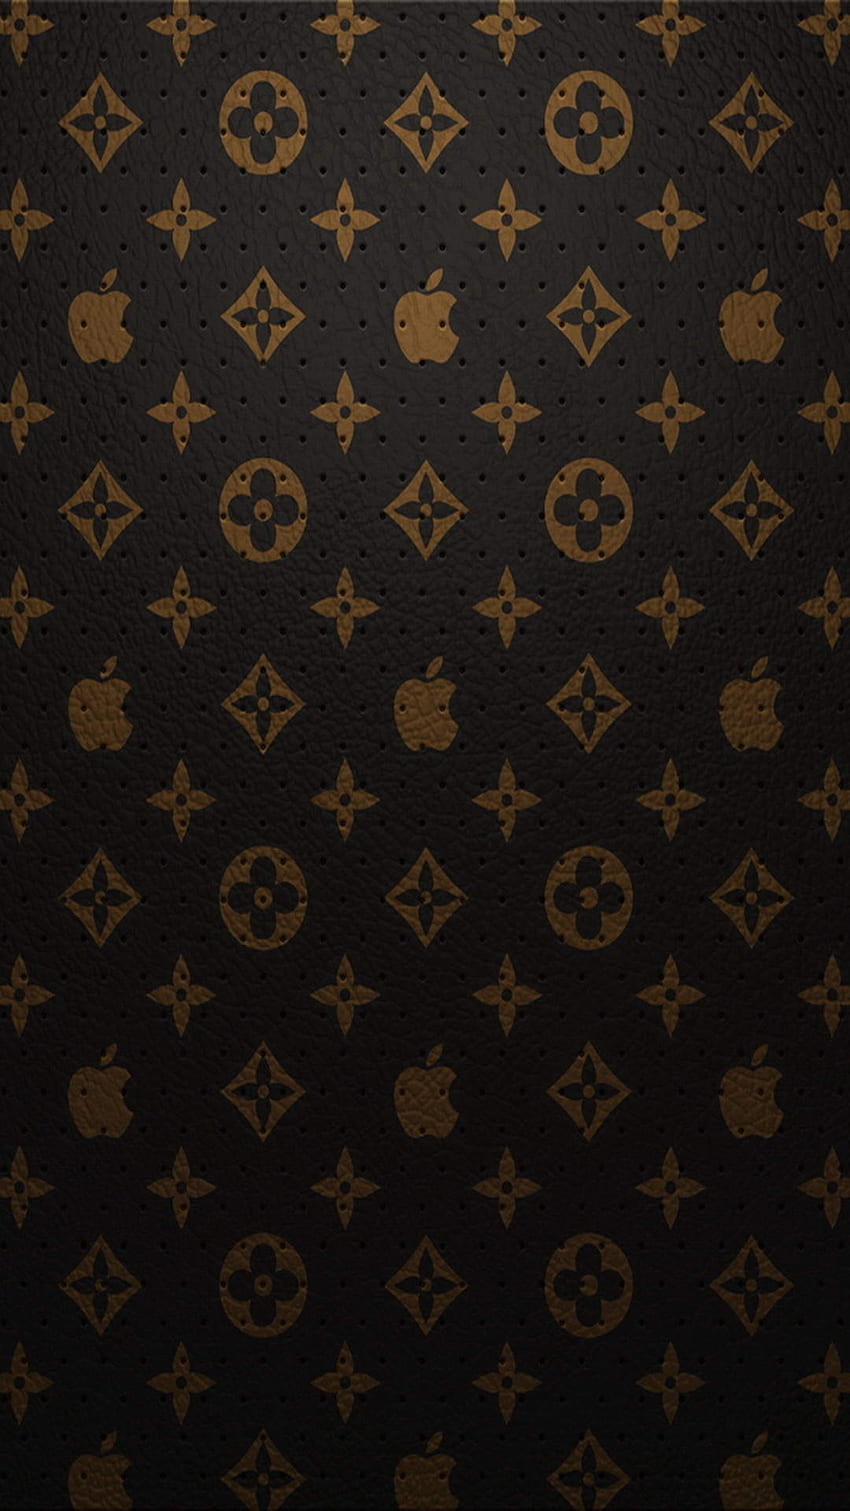 10 Most Popular Louis Vuitton Iphone Wallpaper FULL HD 1080p For